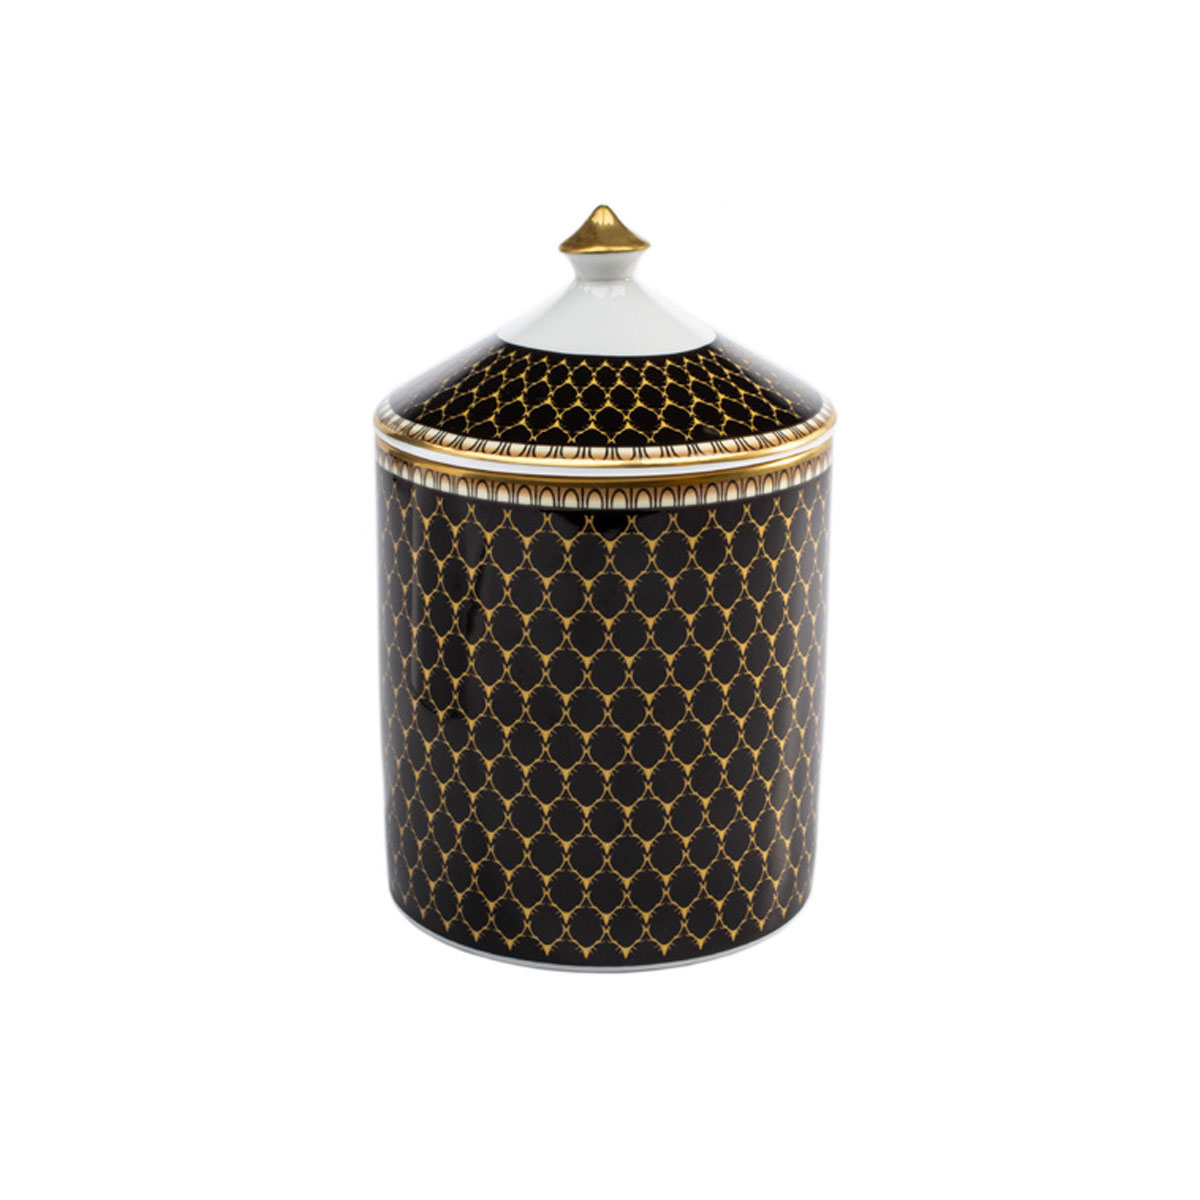 Halcyon Days GC Antler Trellis Black Gold Oud Imperial Lidded Candle